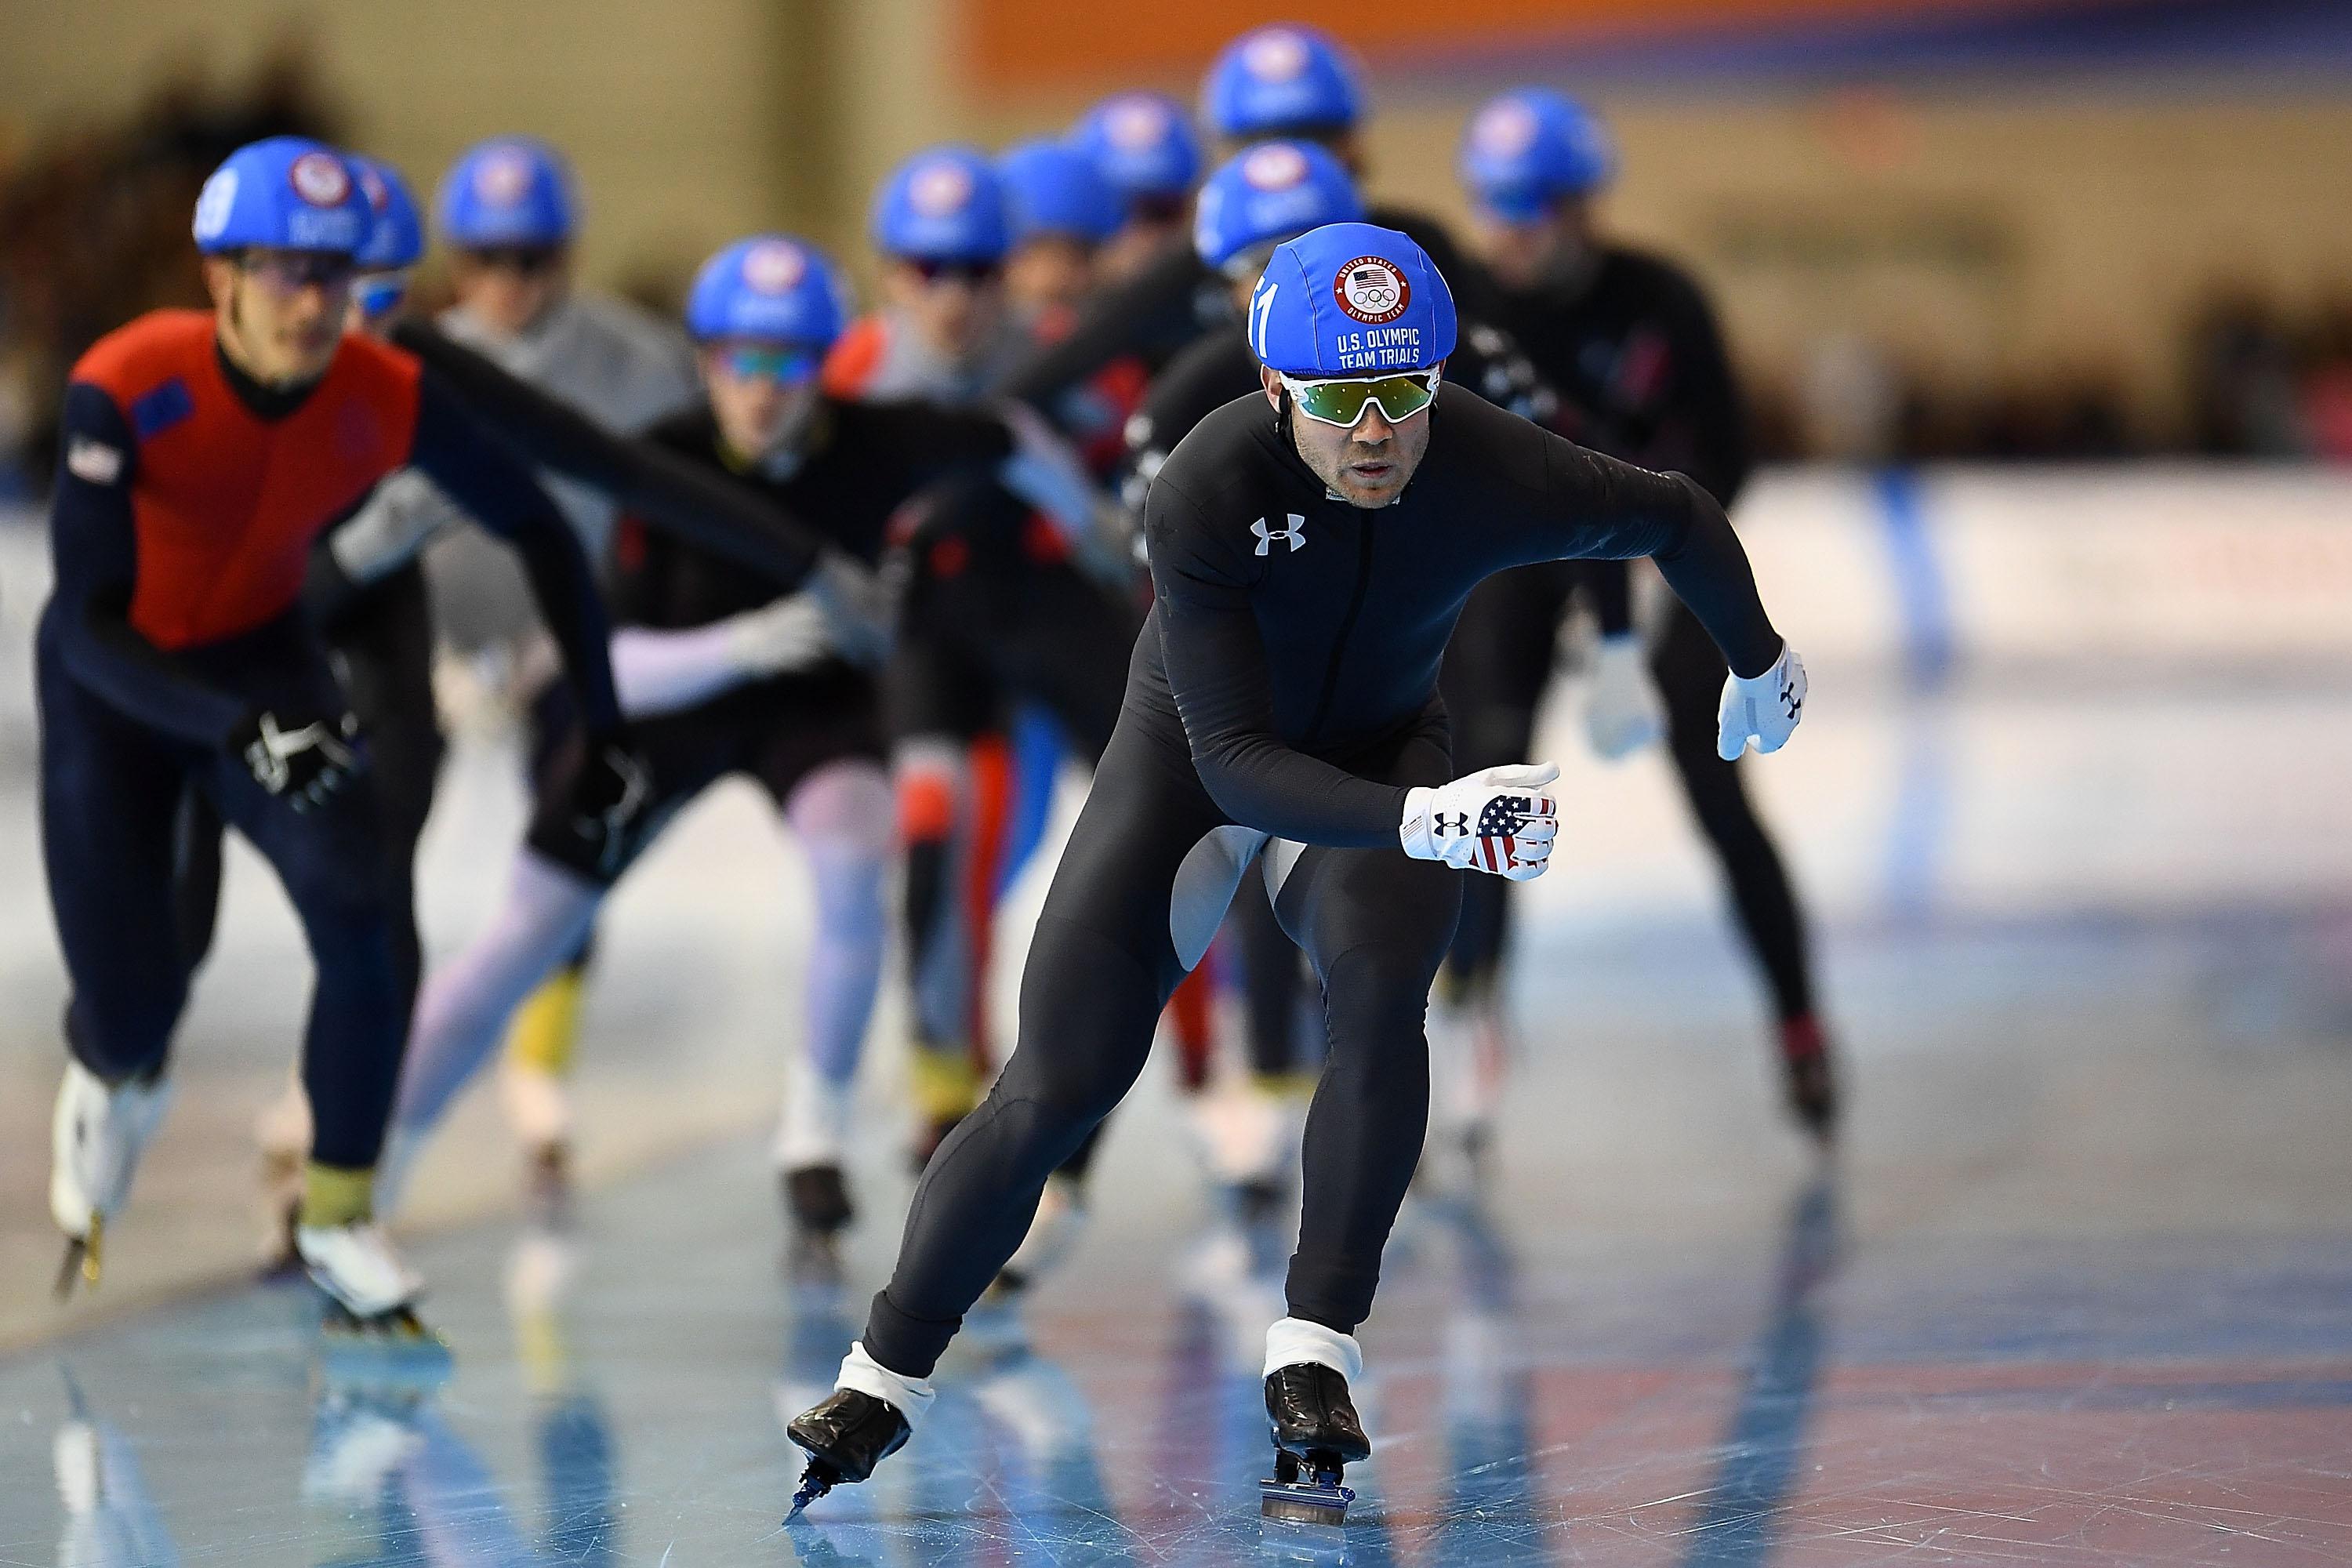 Joey Mantia leads a group of skaters in the men’s mass start event during the Long Track Speed Skating Olympic Trials at the Pettit National Ice Center on Jan. 7 in Milwaukee.